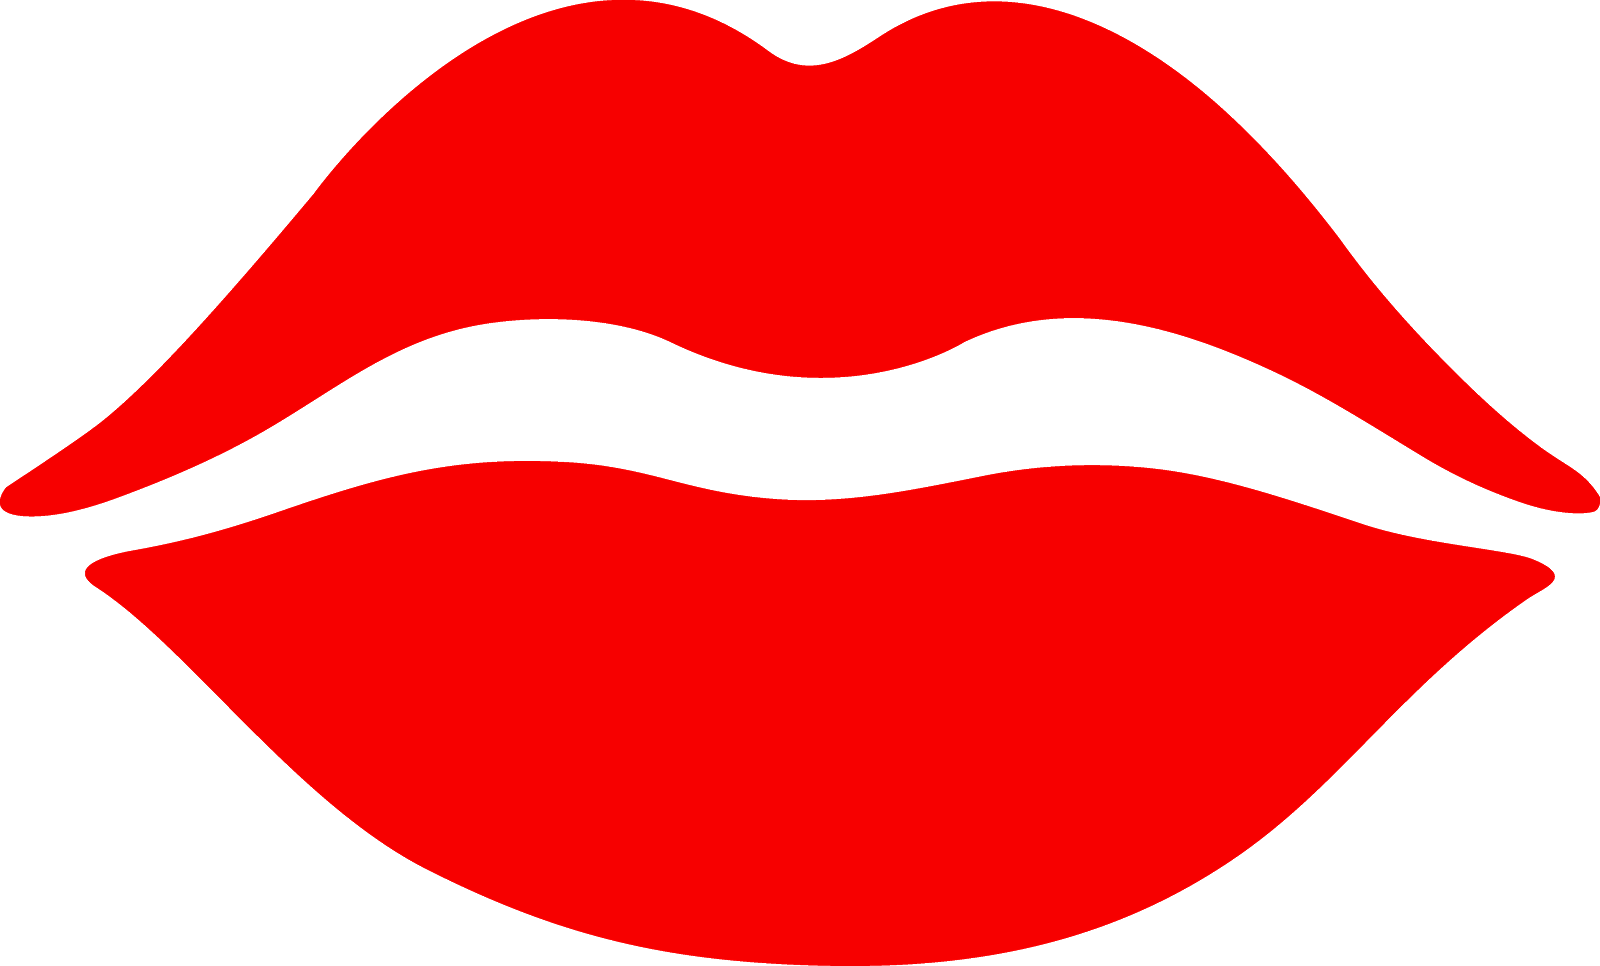 Lips clipart logo, Lips logo Transparent FREE for download on ...